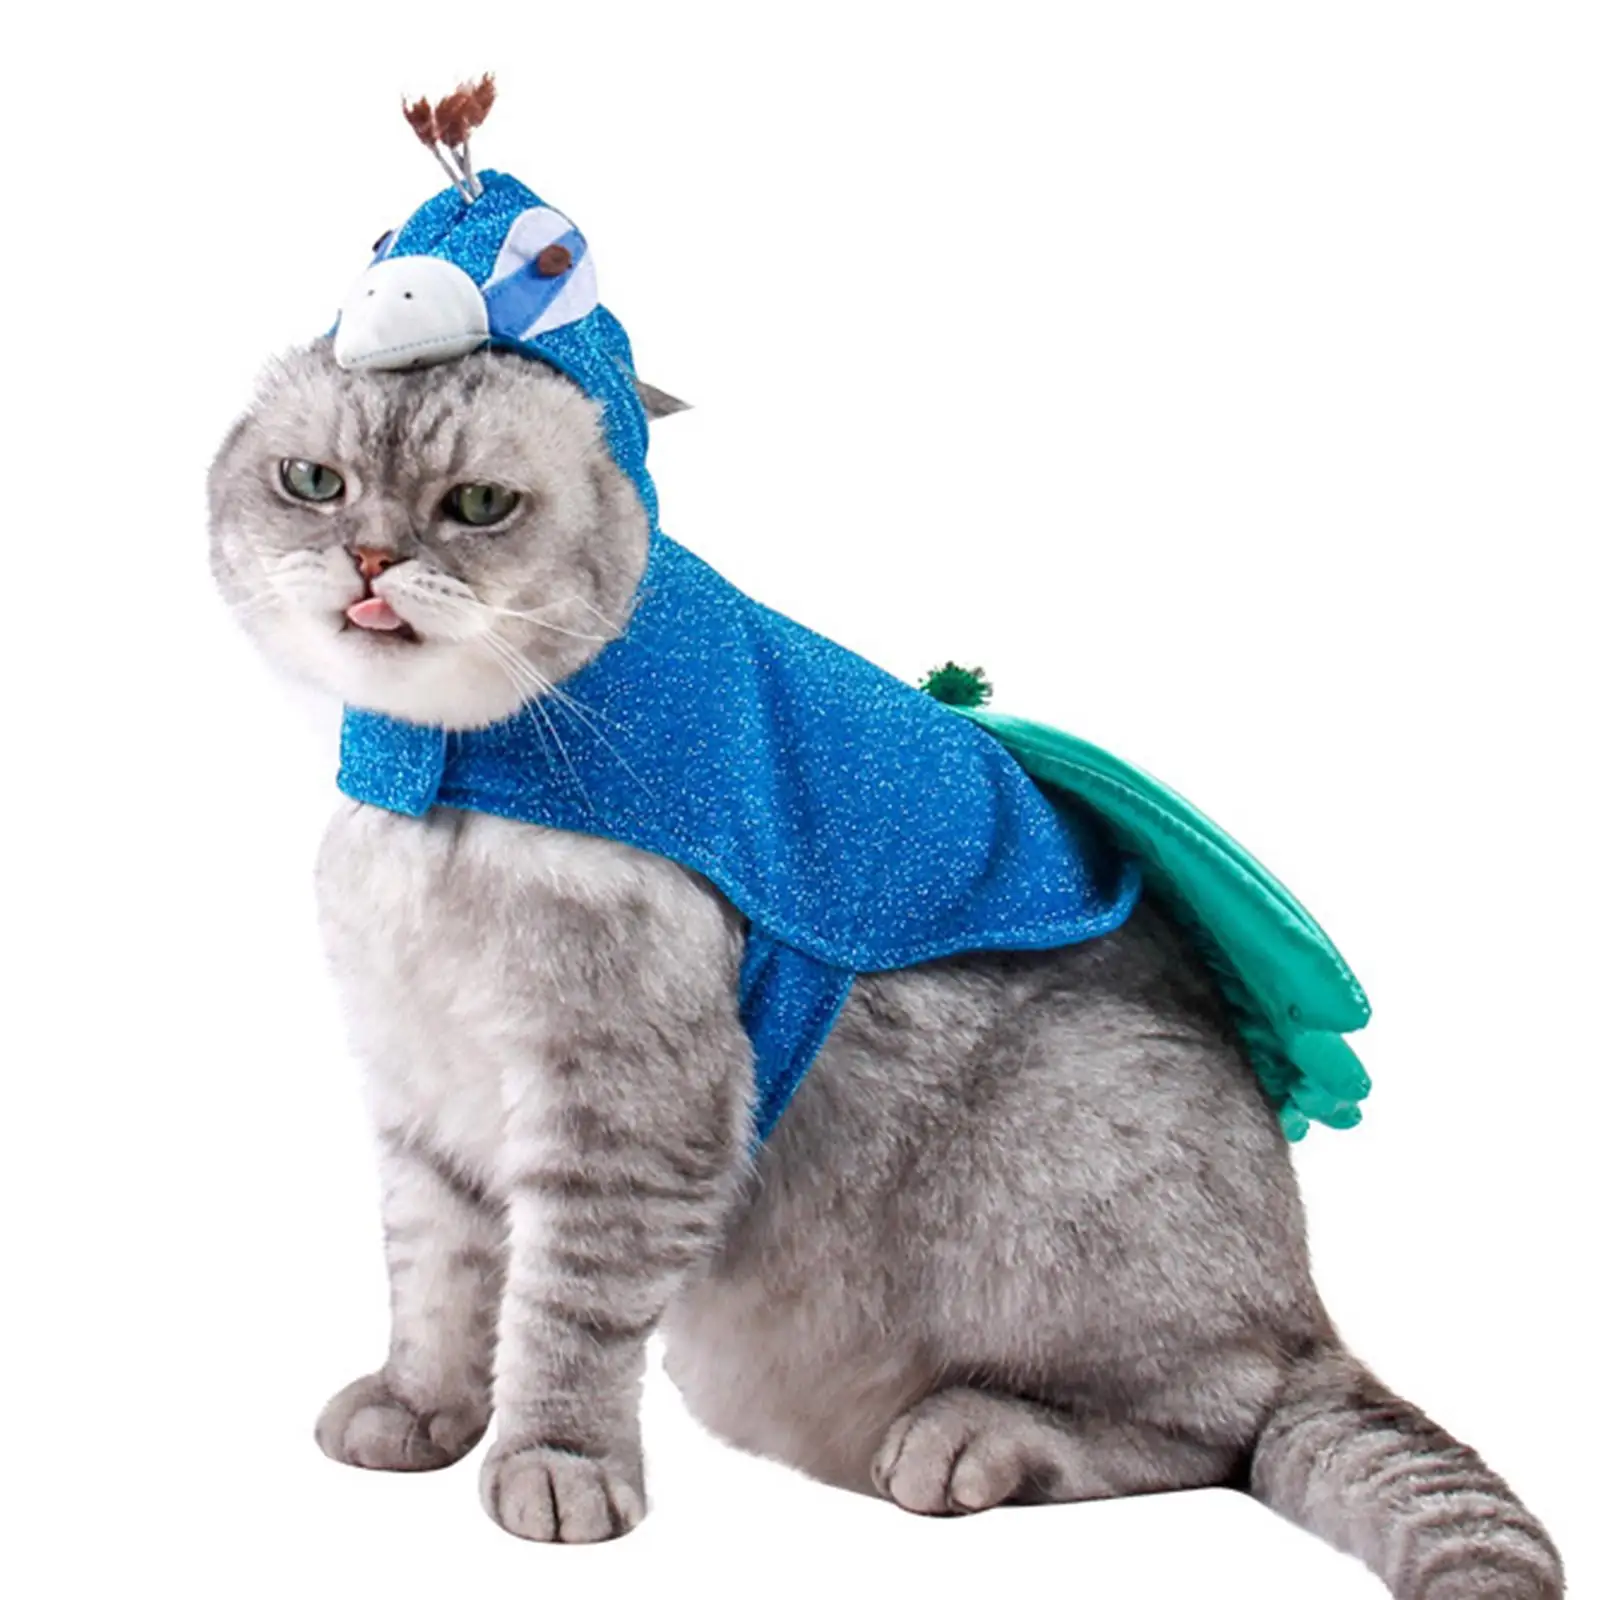 Funny Cat Peacock Costume Hat Clothing Outfit Soft Breathable Lightweight Pet Clothes for Kitten Rabbit Puppy Photograph Holiday